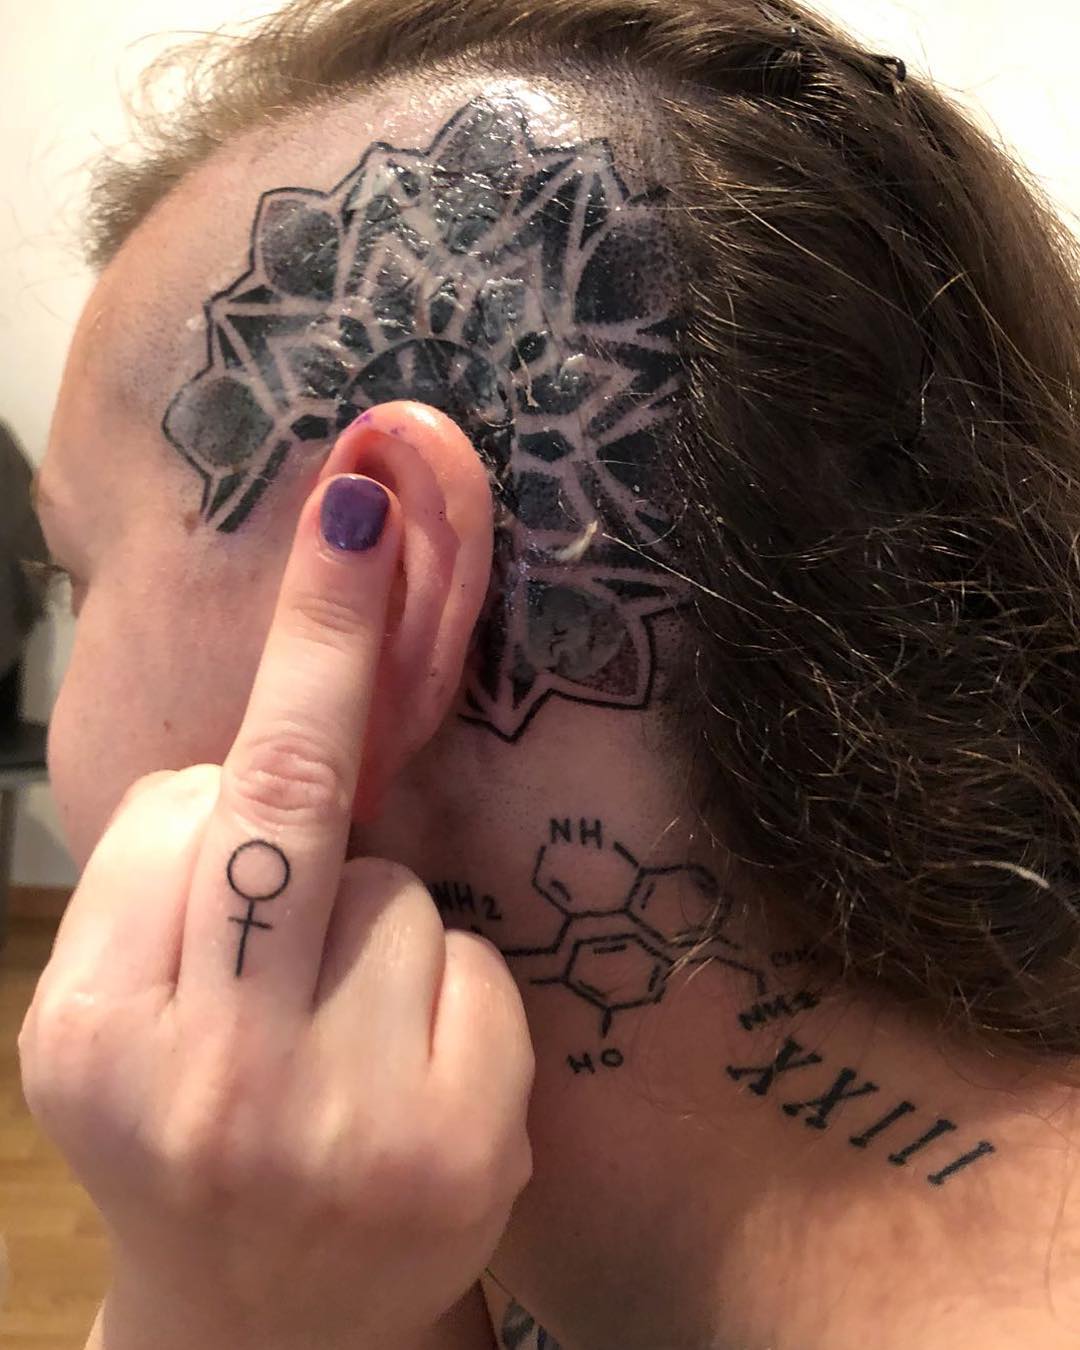 Head and middle finger feminist tattoo. Pic by mary___volkova